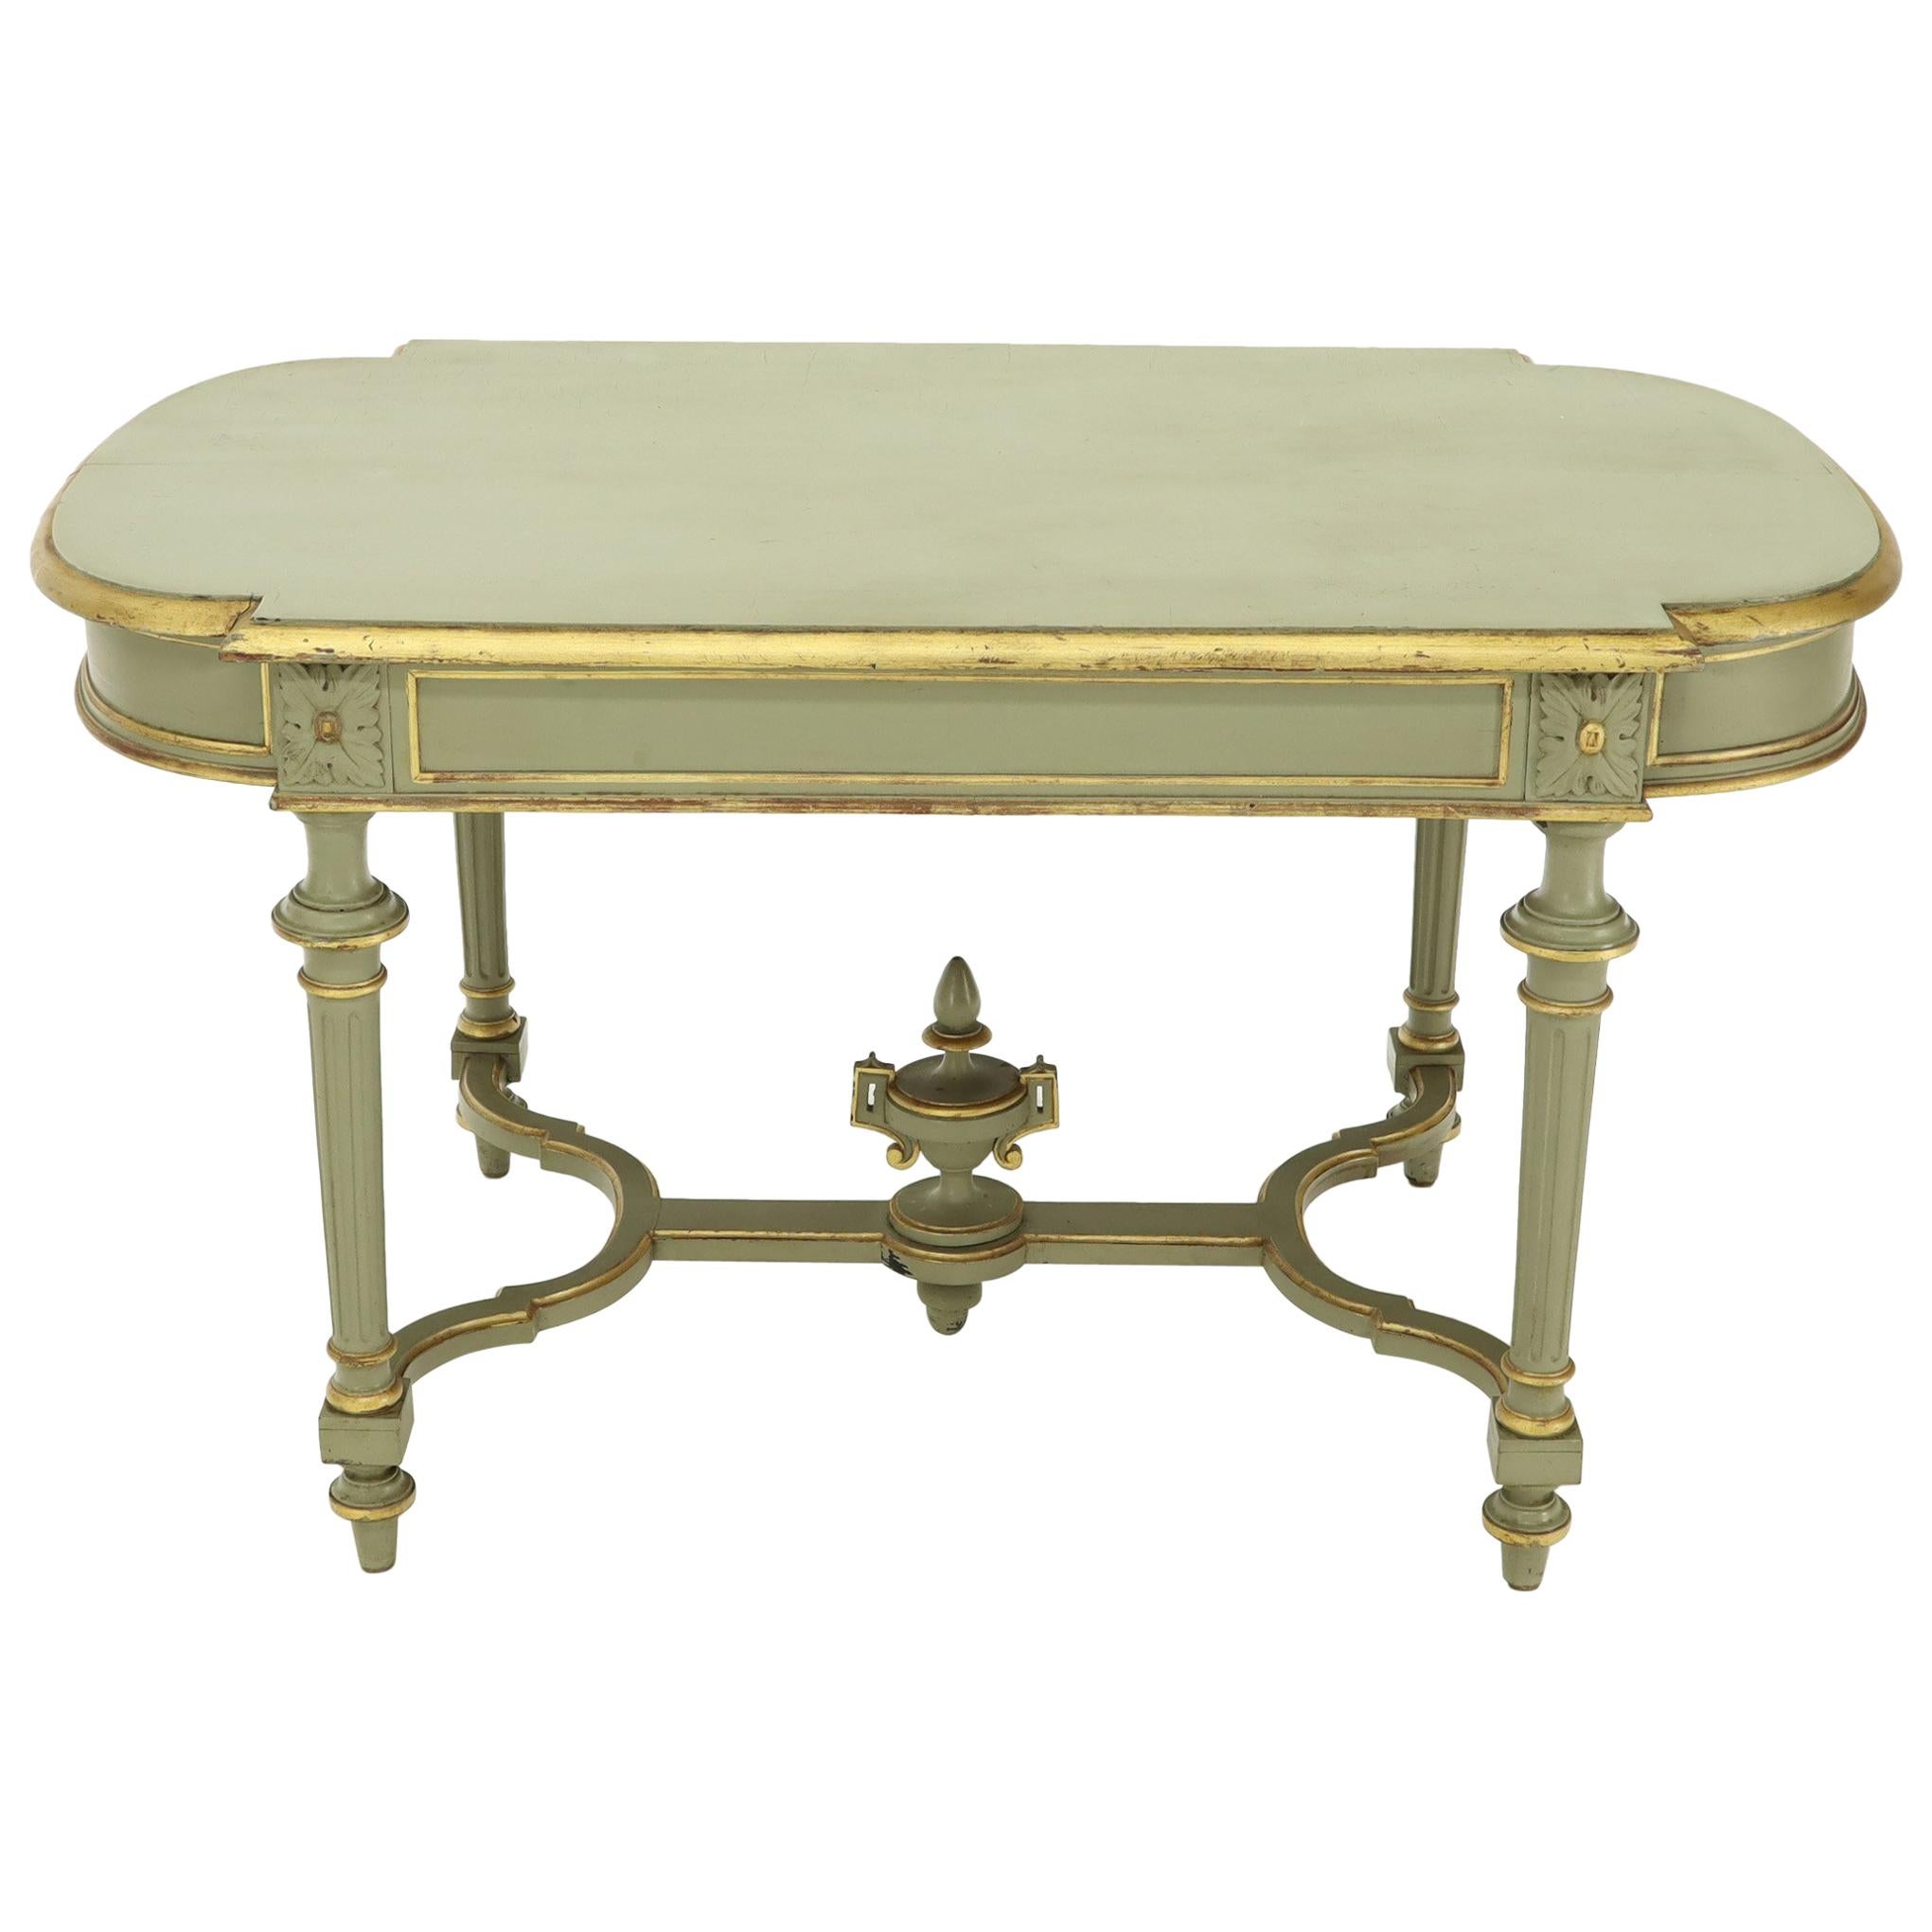 Shabby Chic and Gold Leaf Distressed Antique Table Desk Console Grande Console en vente